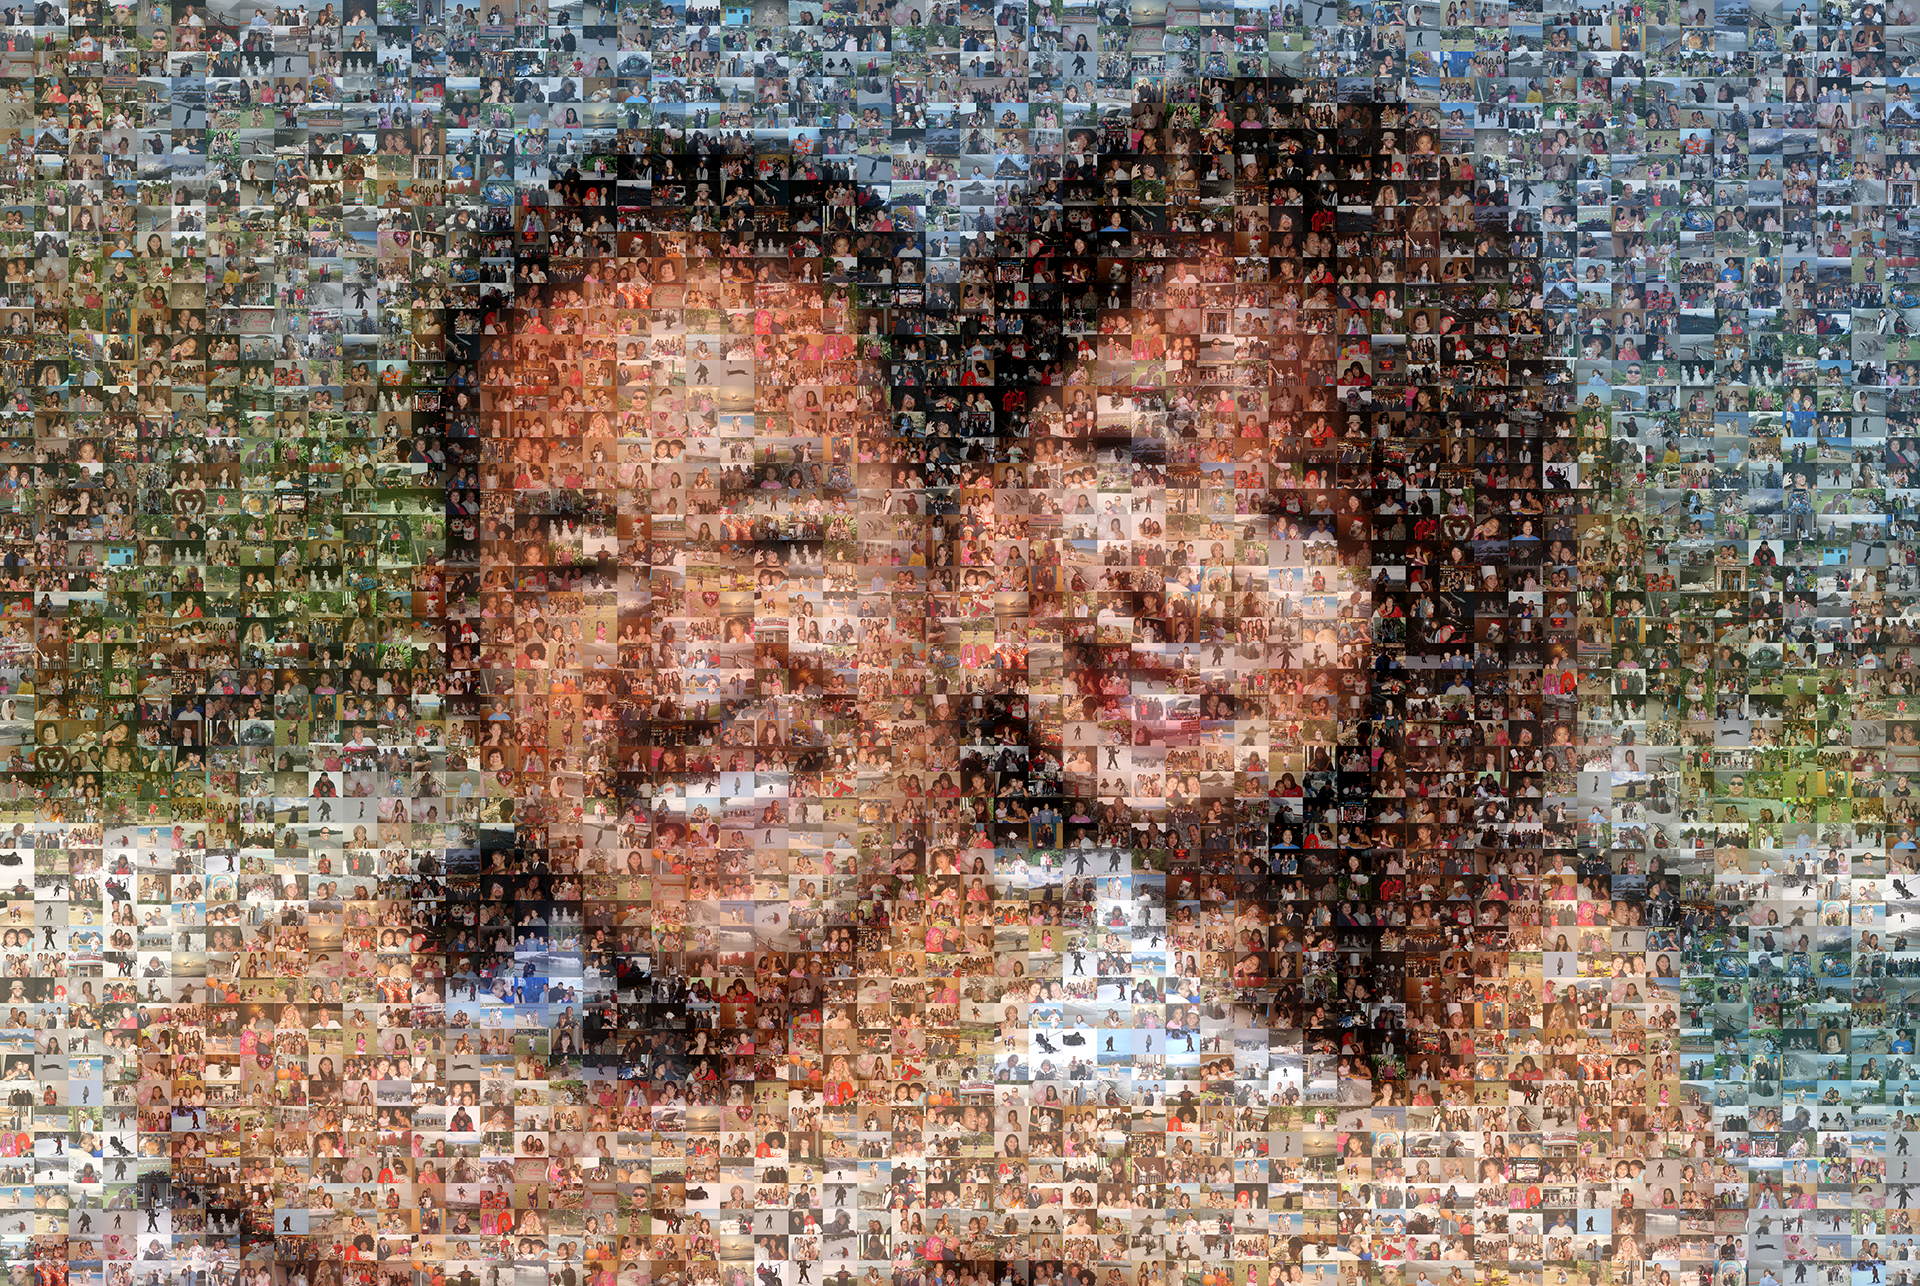 photo mosaic created using 623 user submitted photos